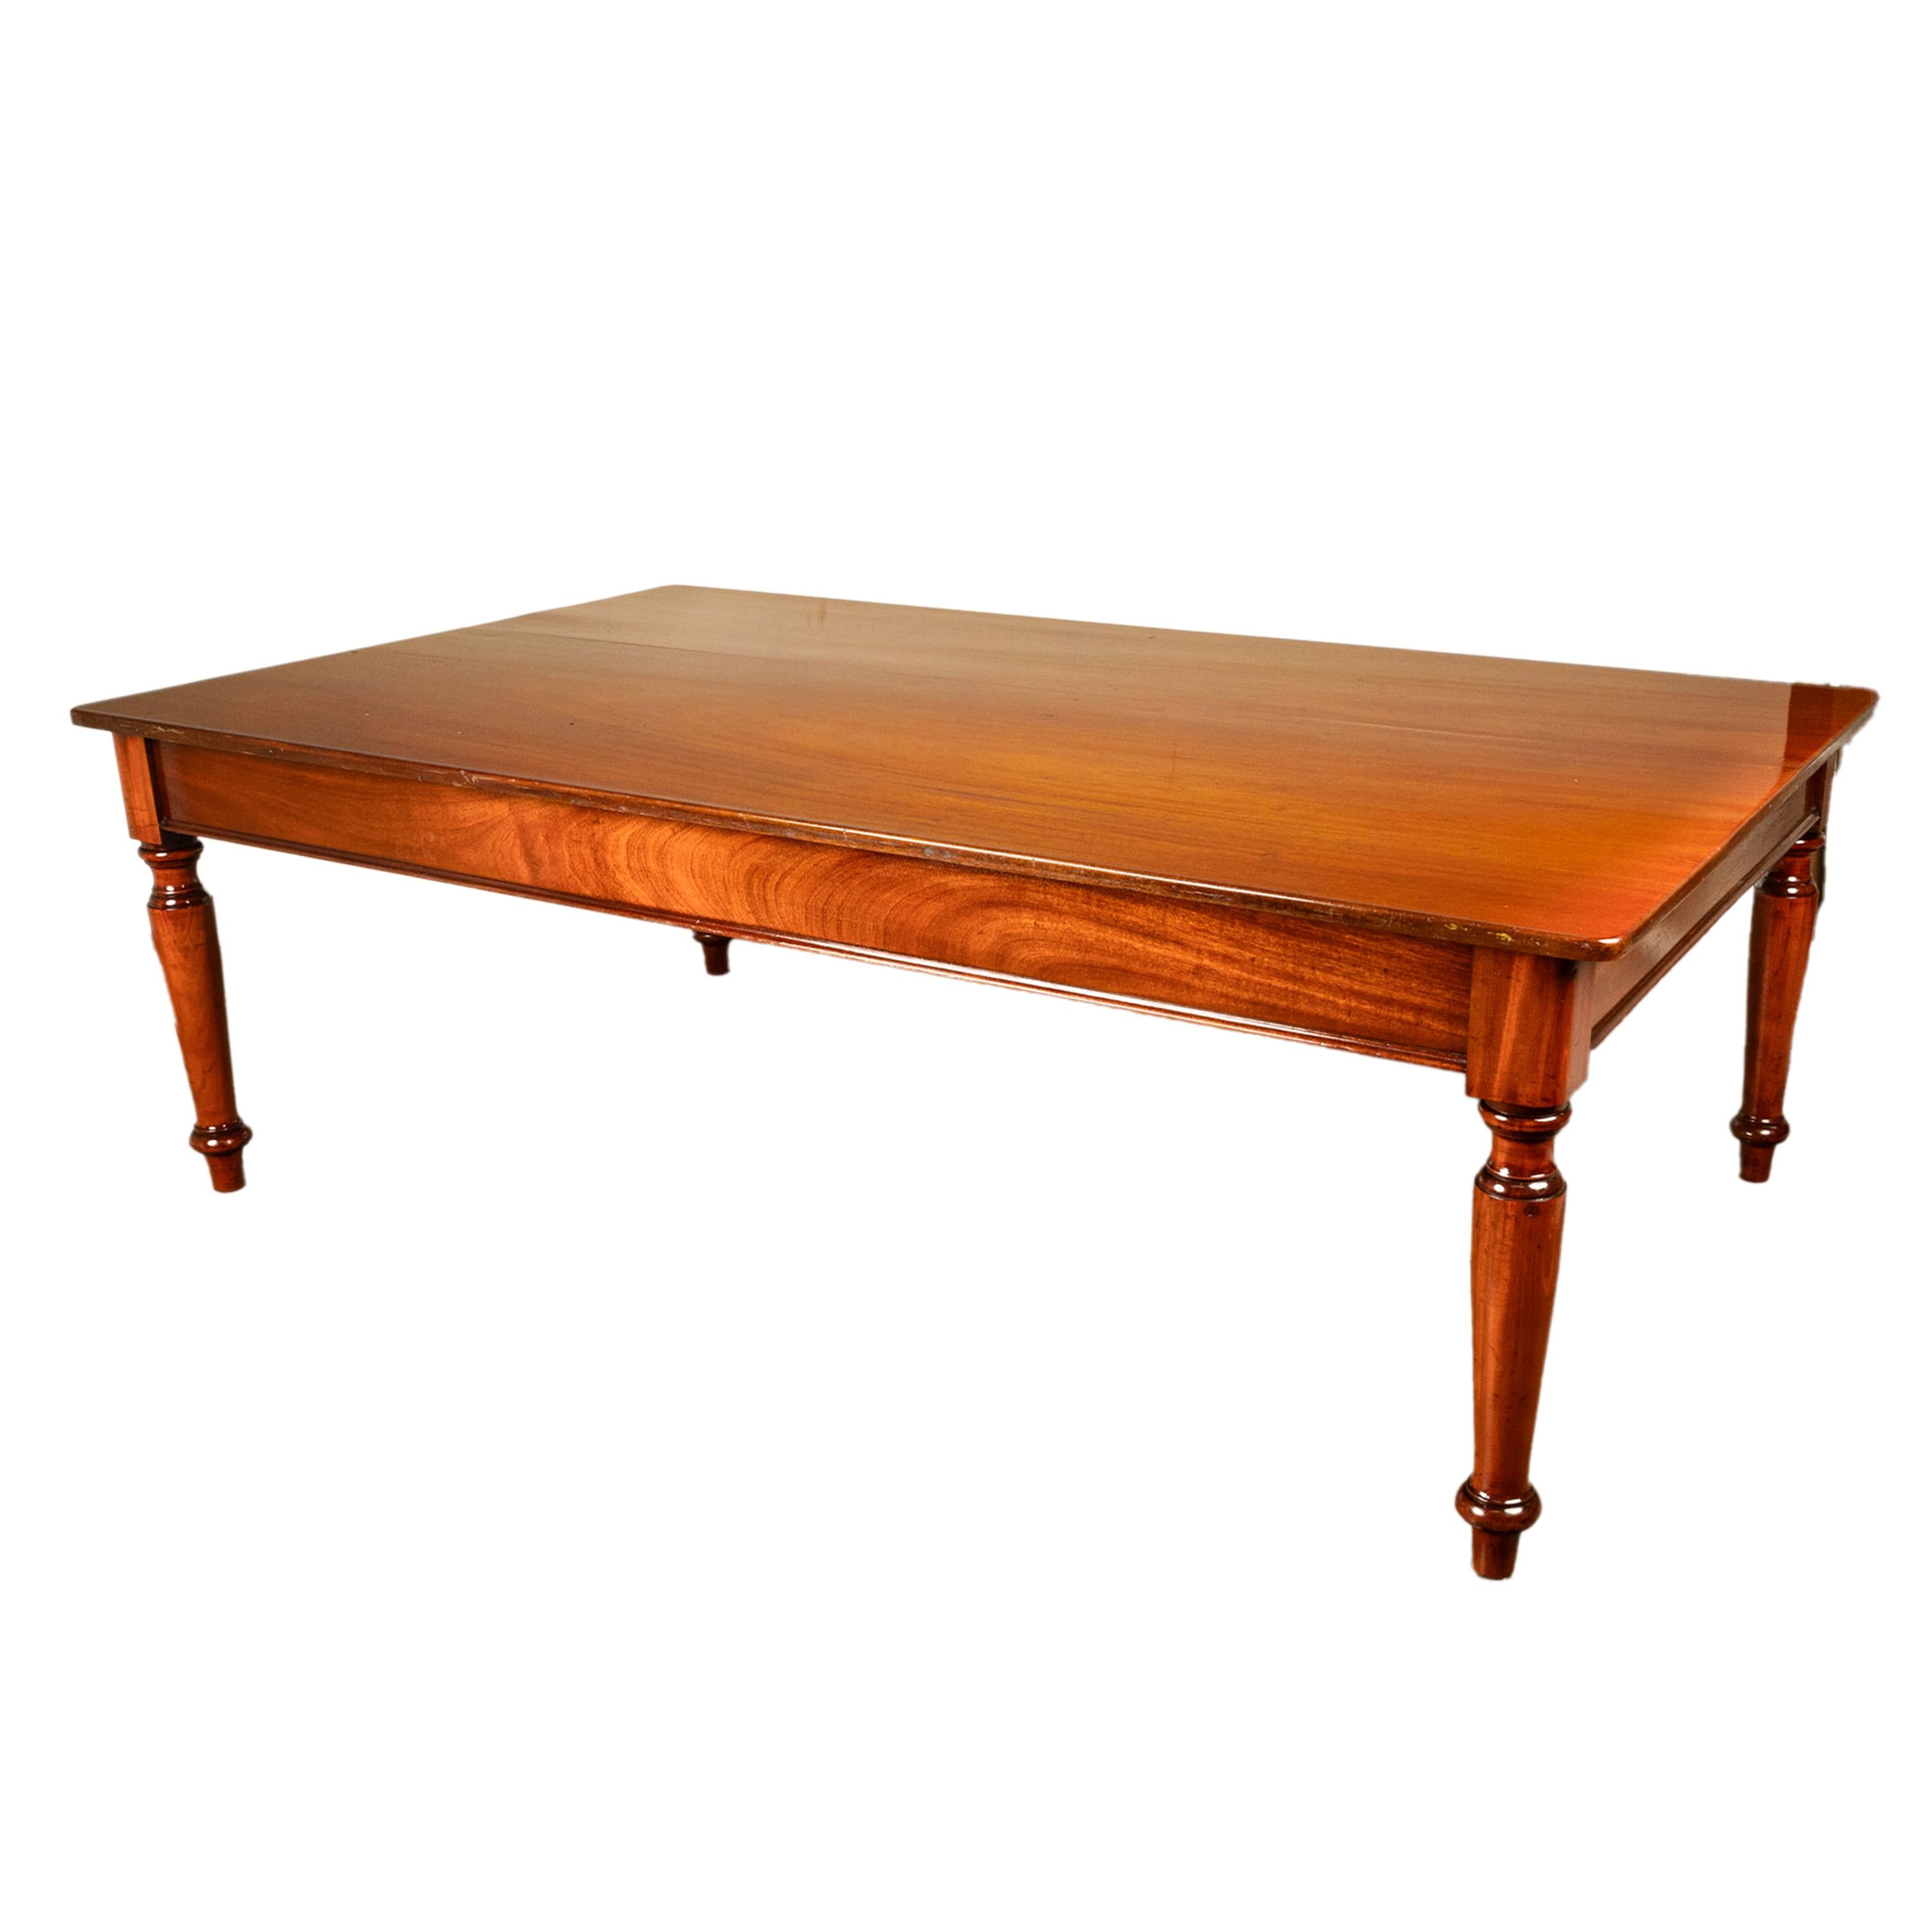 Antique Monumental 19th Century Mahogany Library Conference Dining Table 1860 For Sale 6